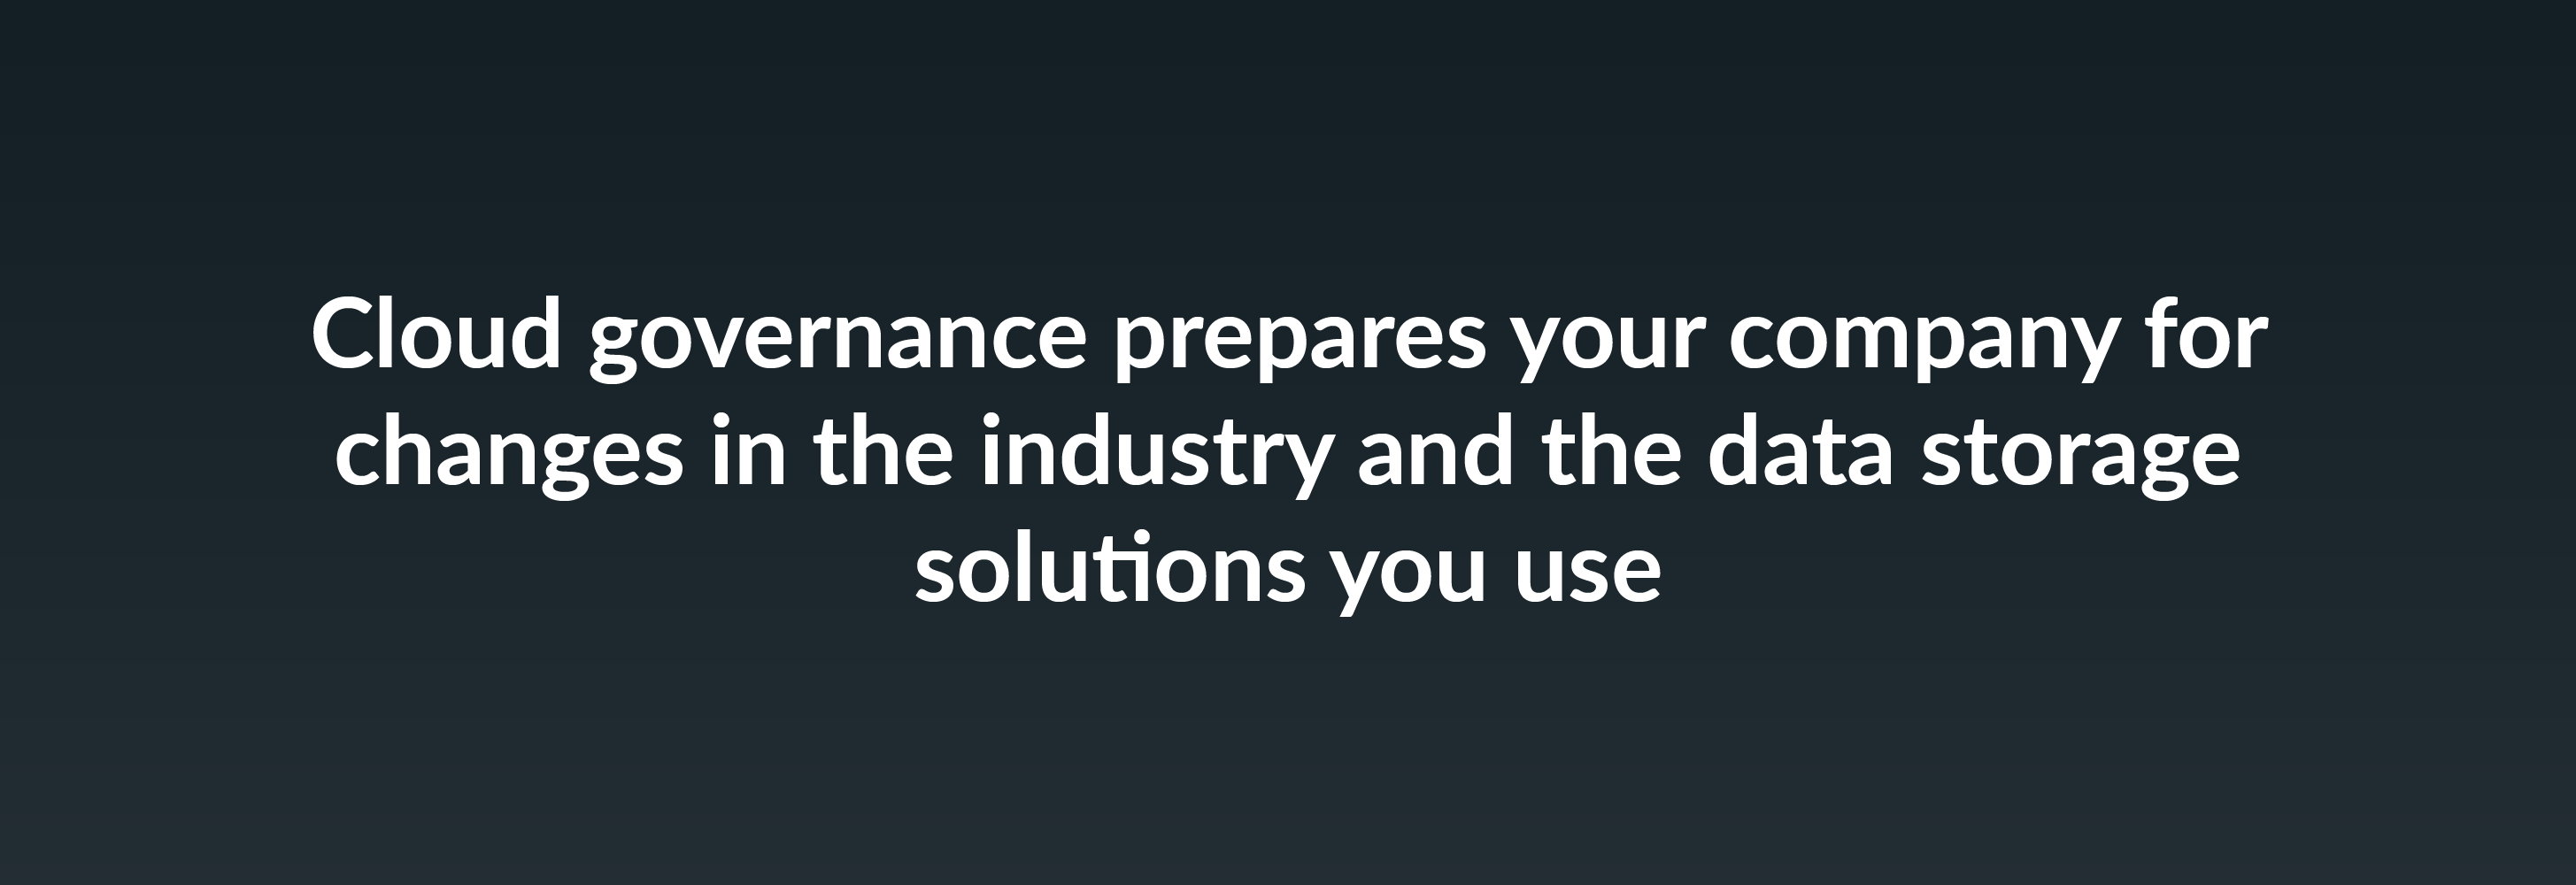 Cloud governance prepares your company for changes in the industry and the data storage solutions you use